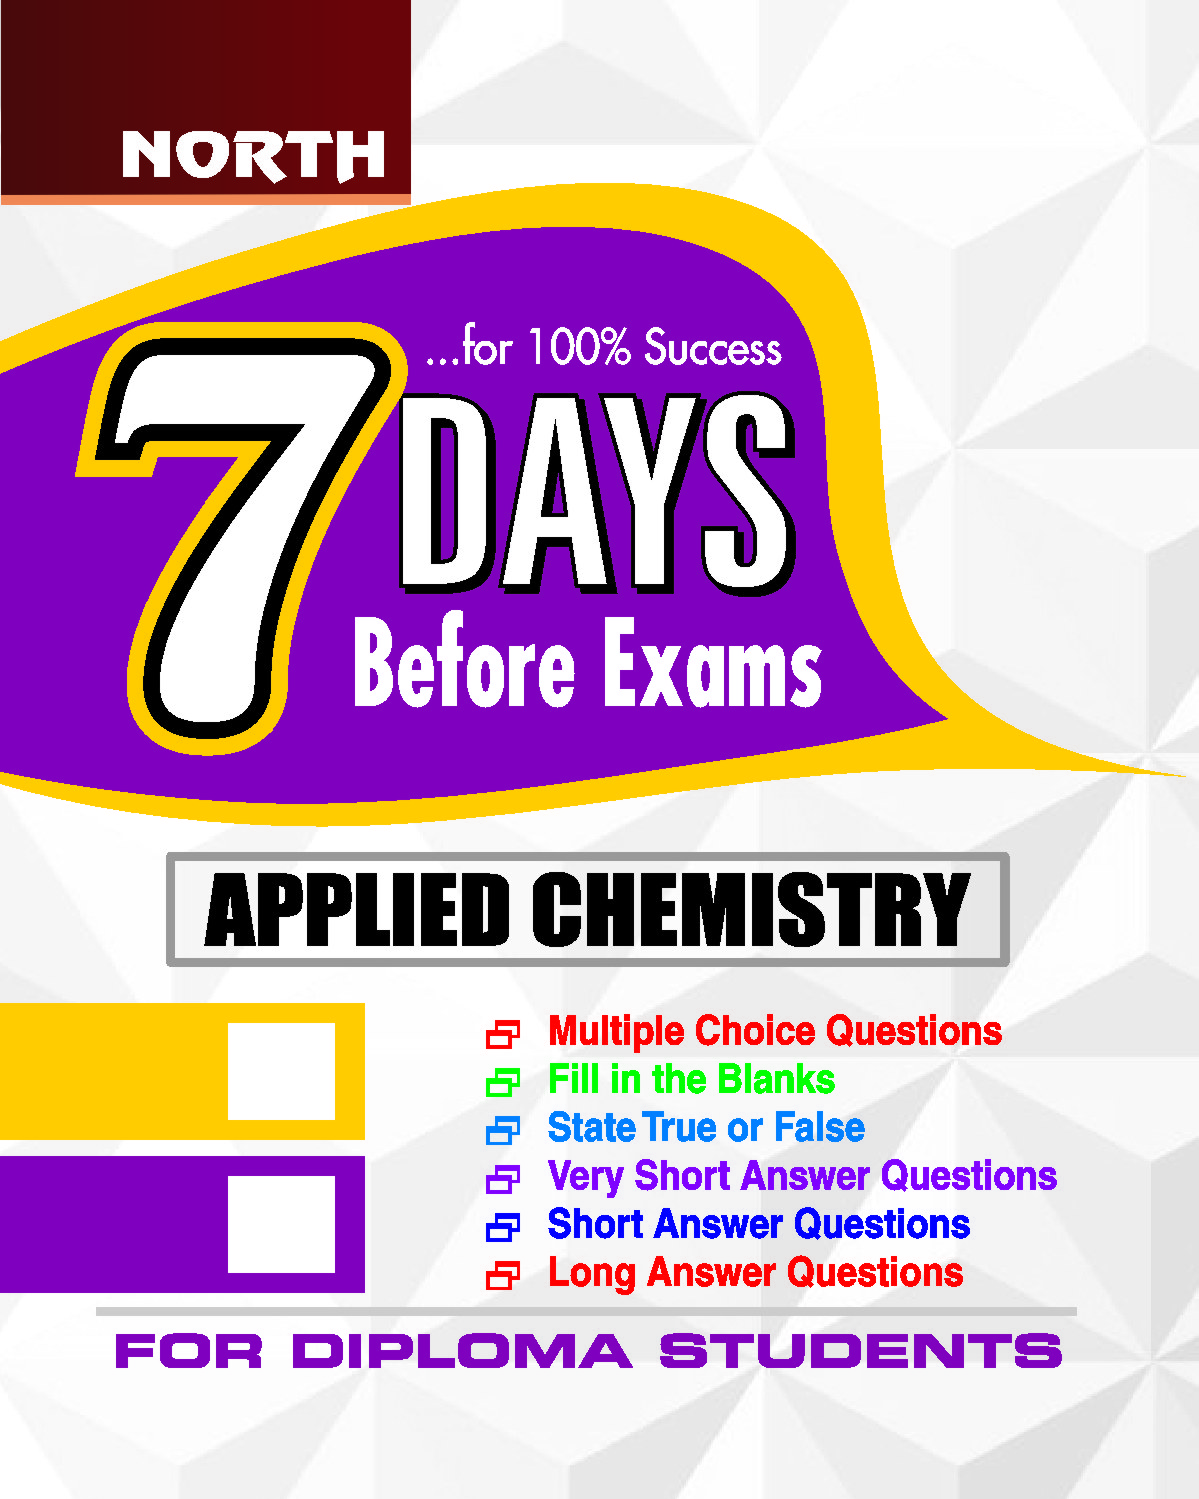 Applied Chemistry 7 days before exams